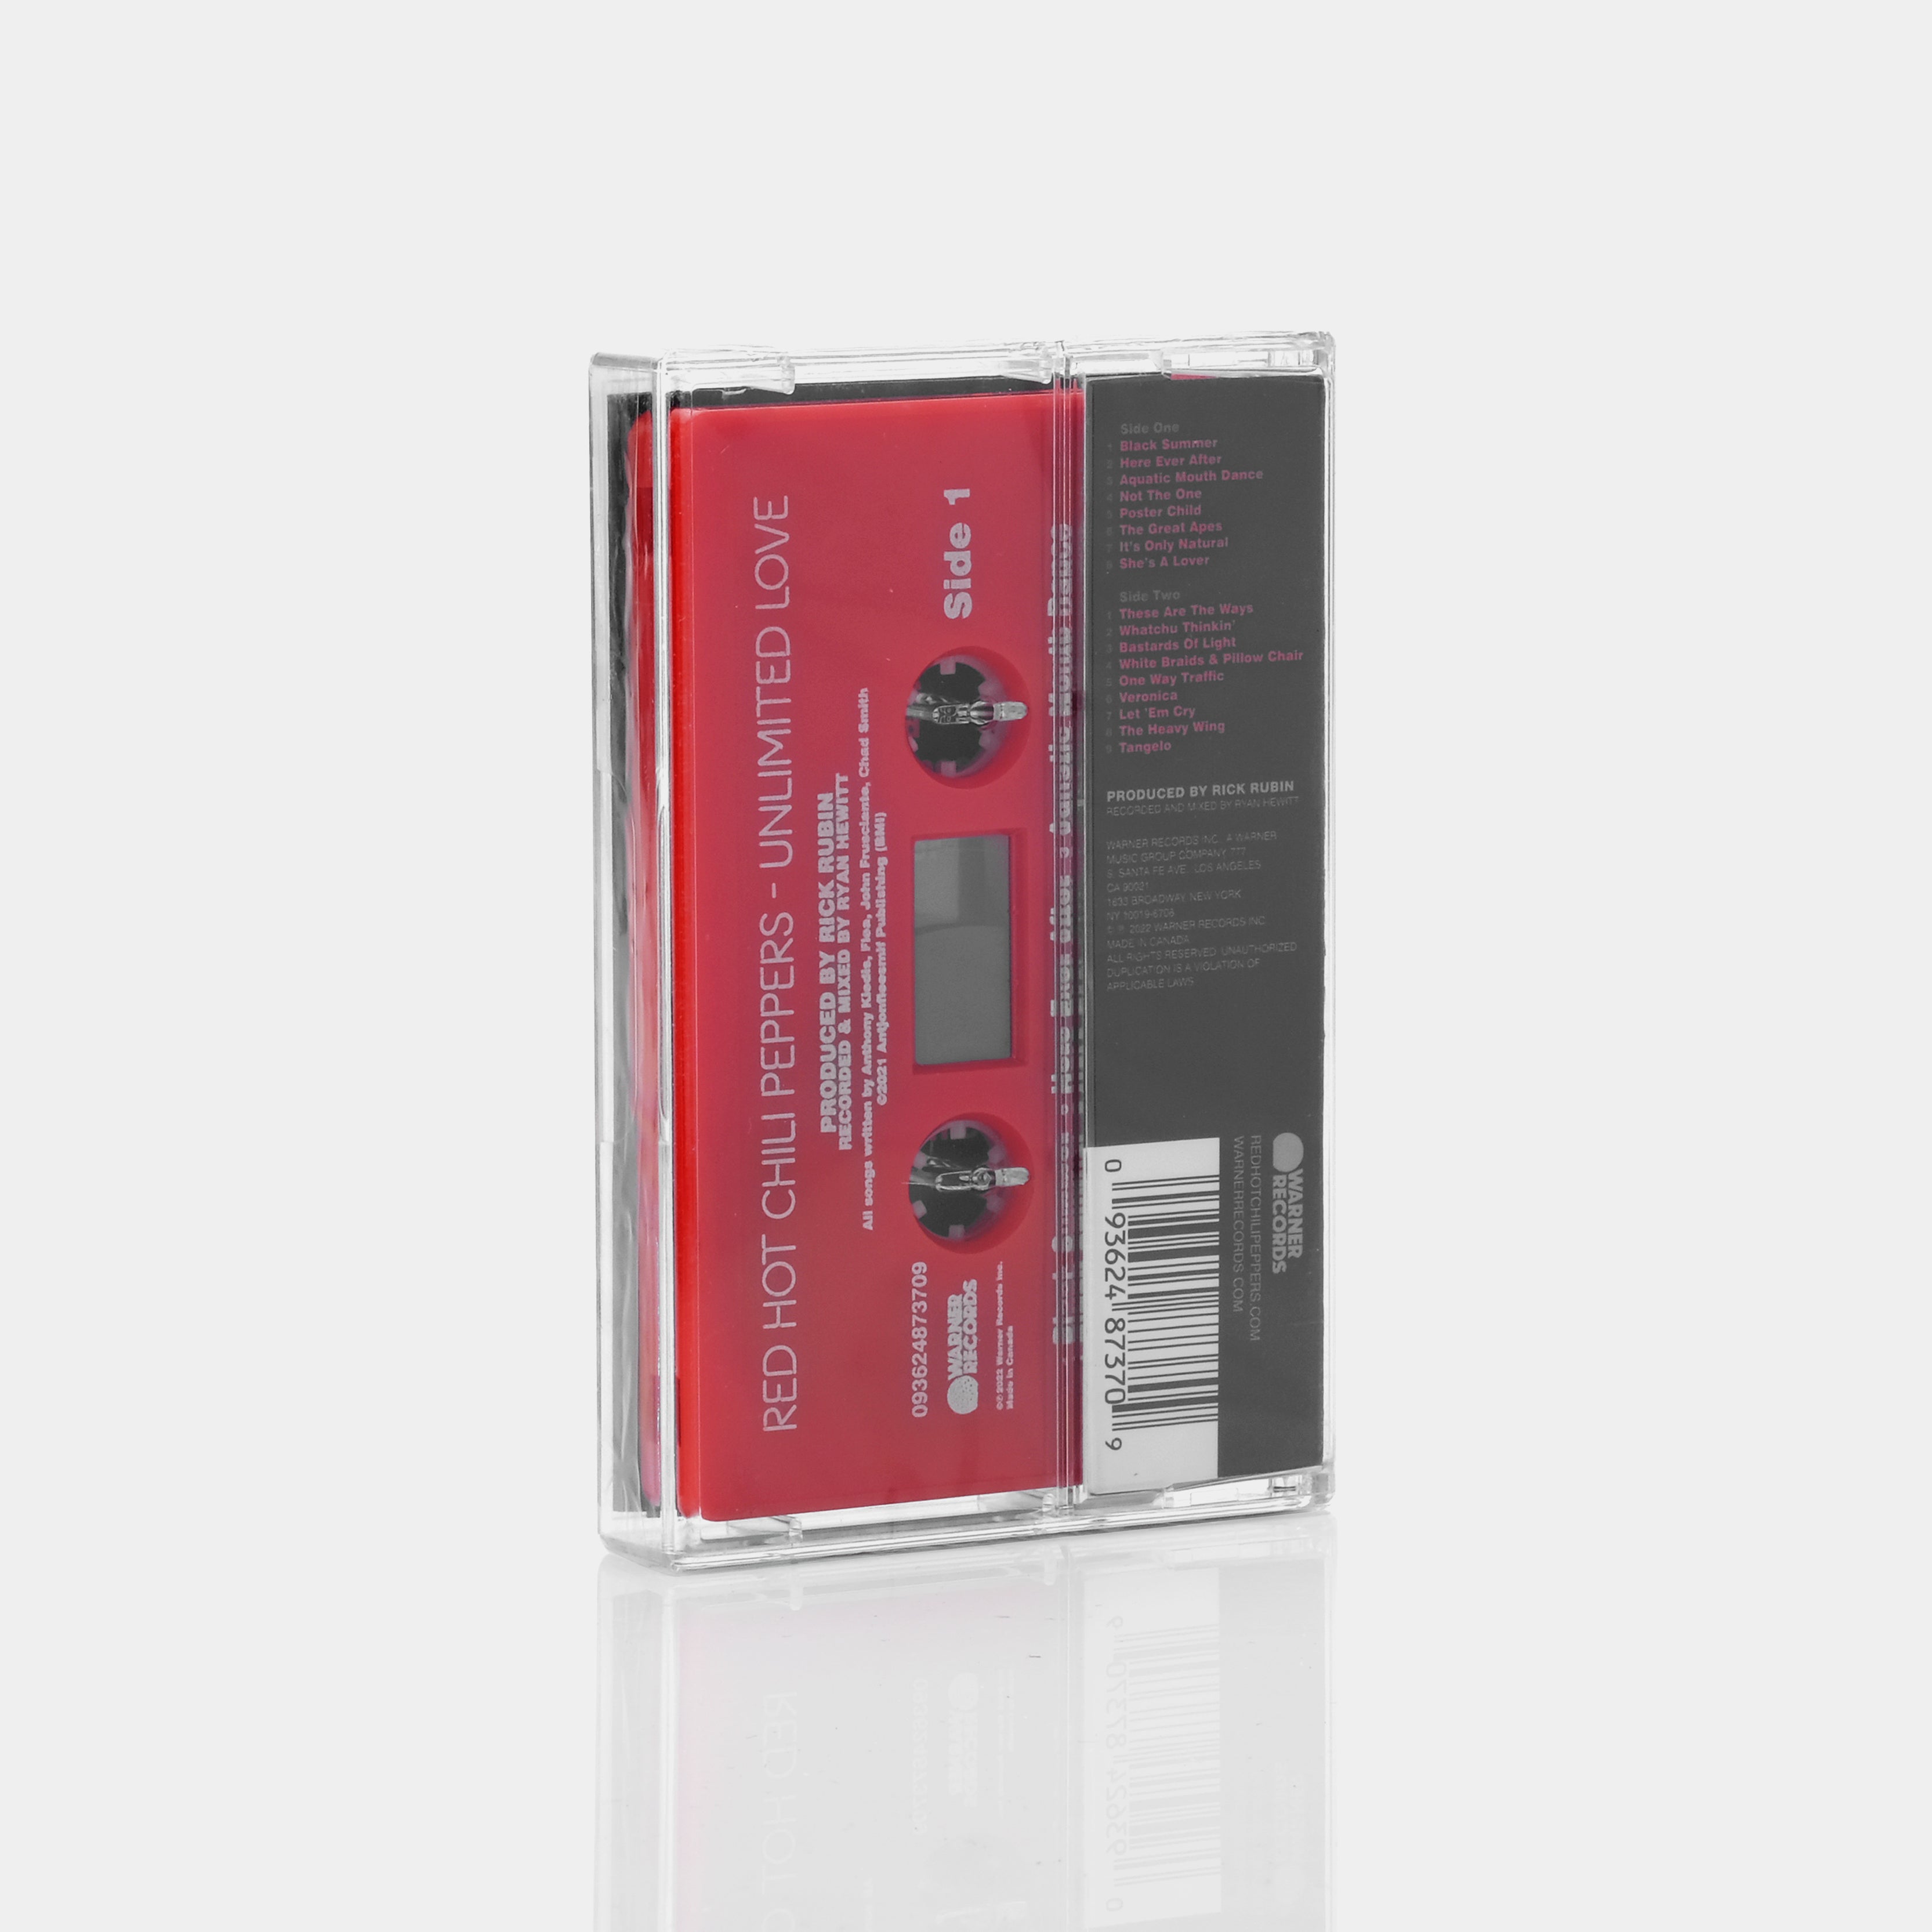 Red Hot Chili Peppers - Unlimited Love Cassette Tape